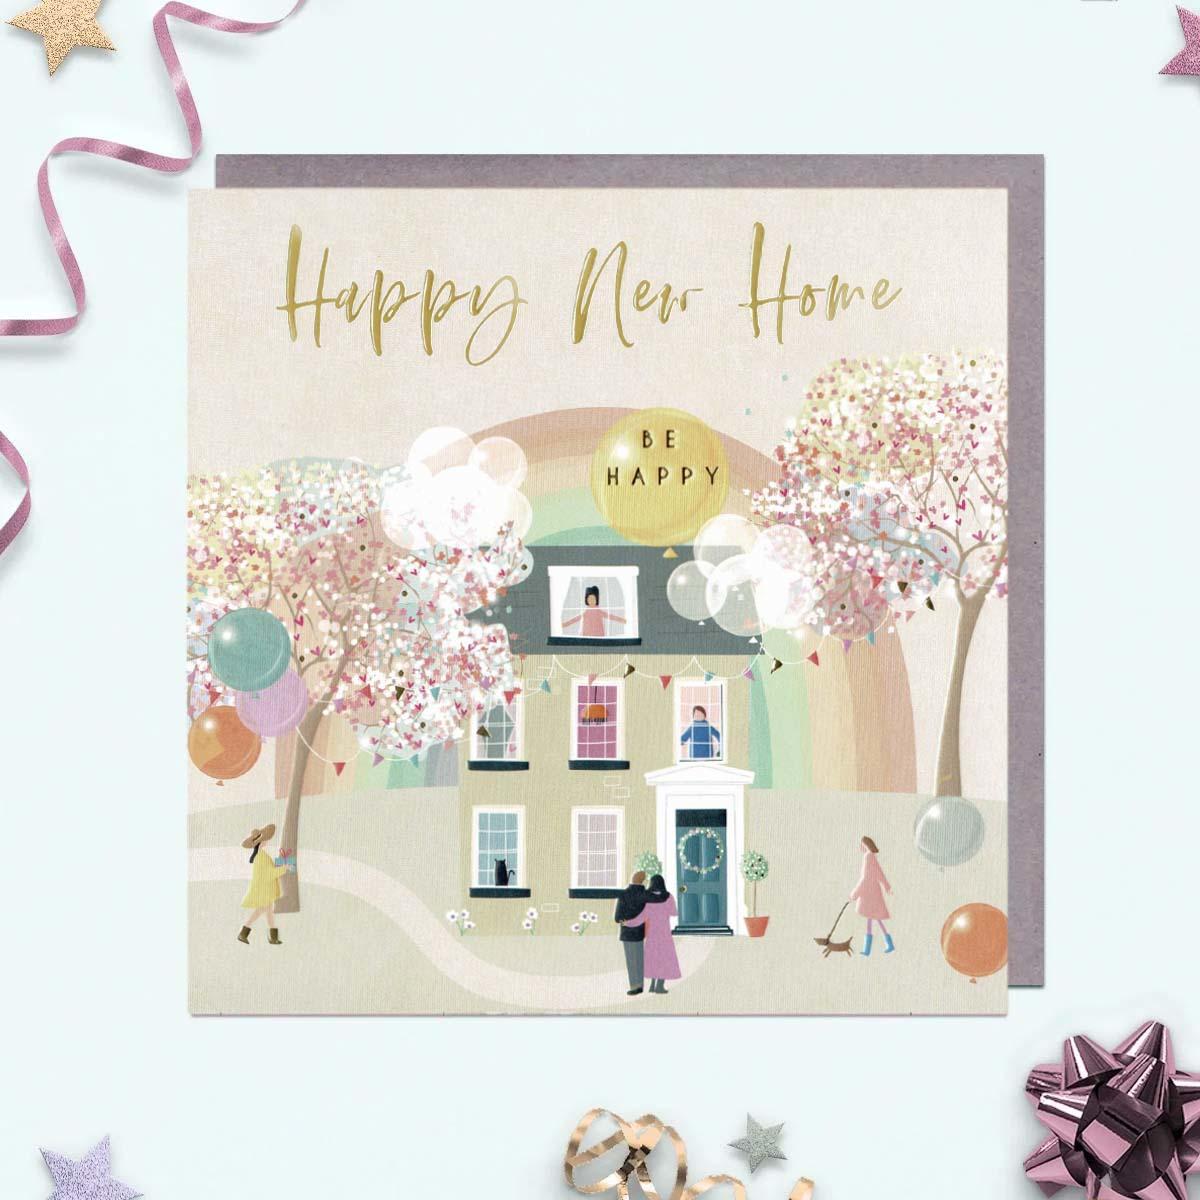 Elle - Happy New Home Card Front Image